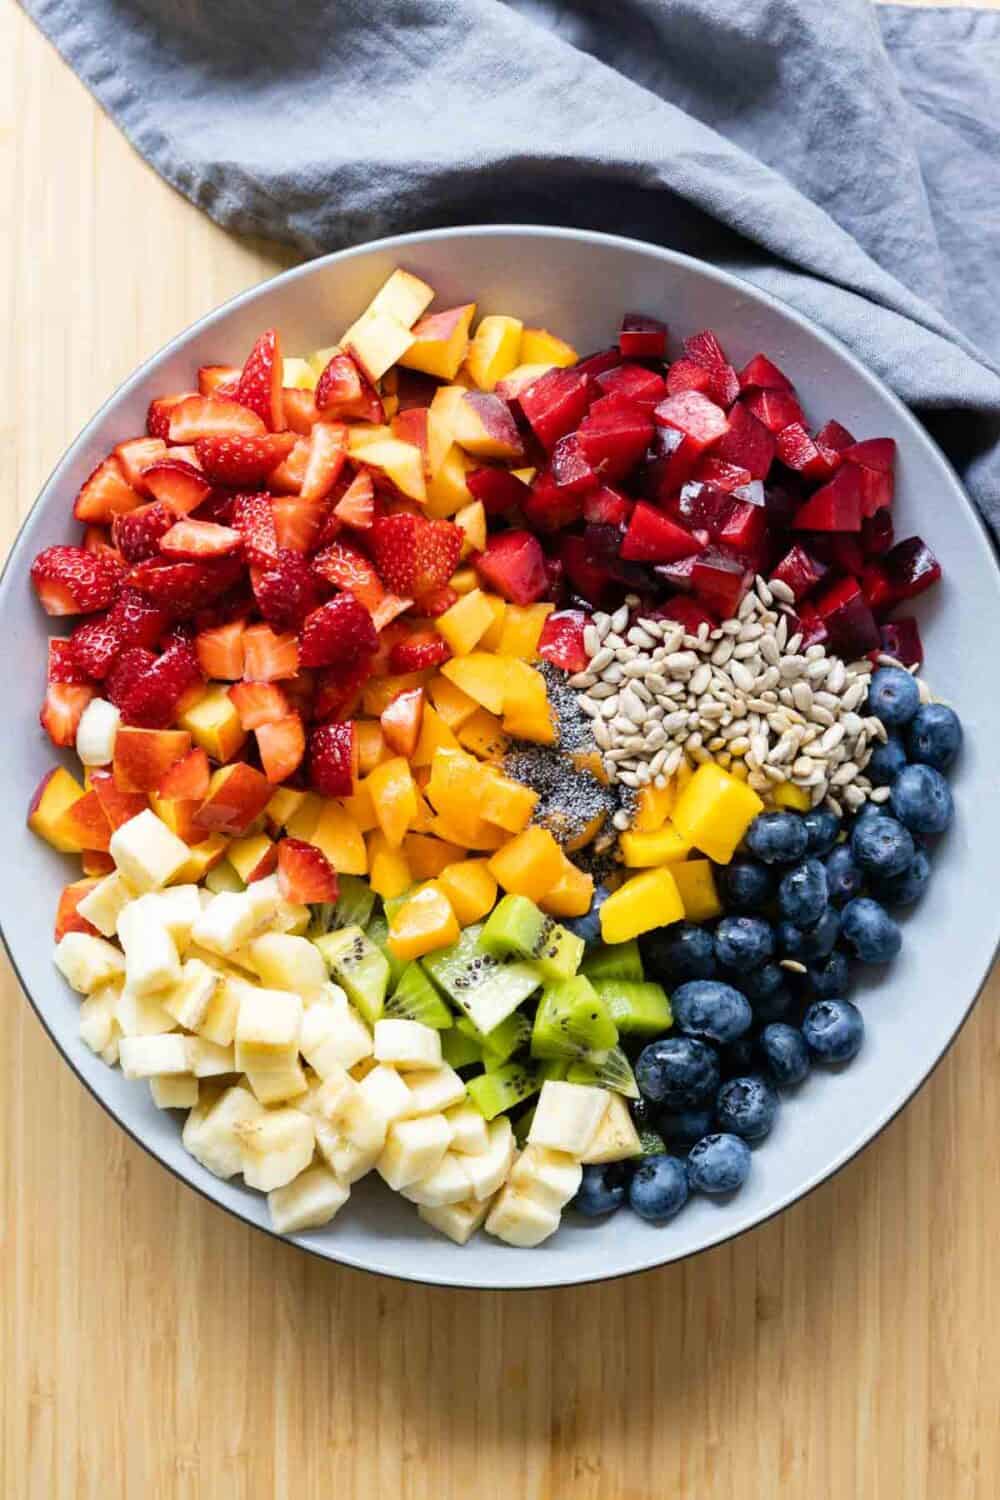 Unmixed fruit salad. Chopped up fruit in a bowl by sections.